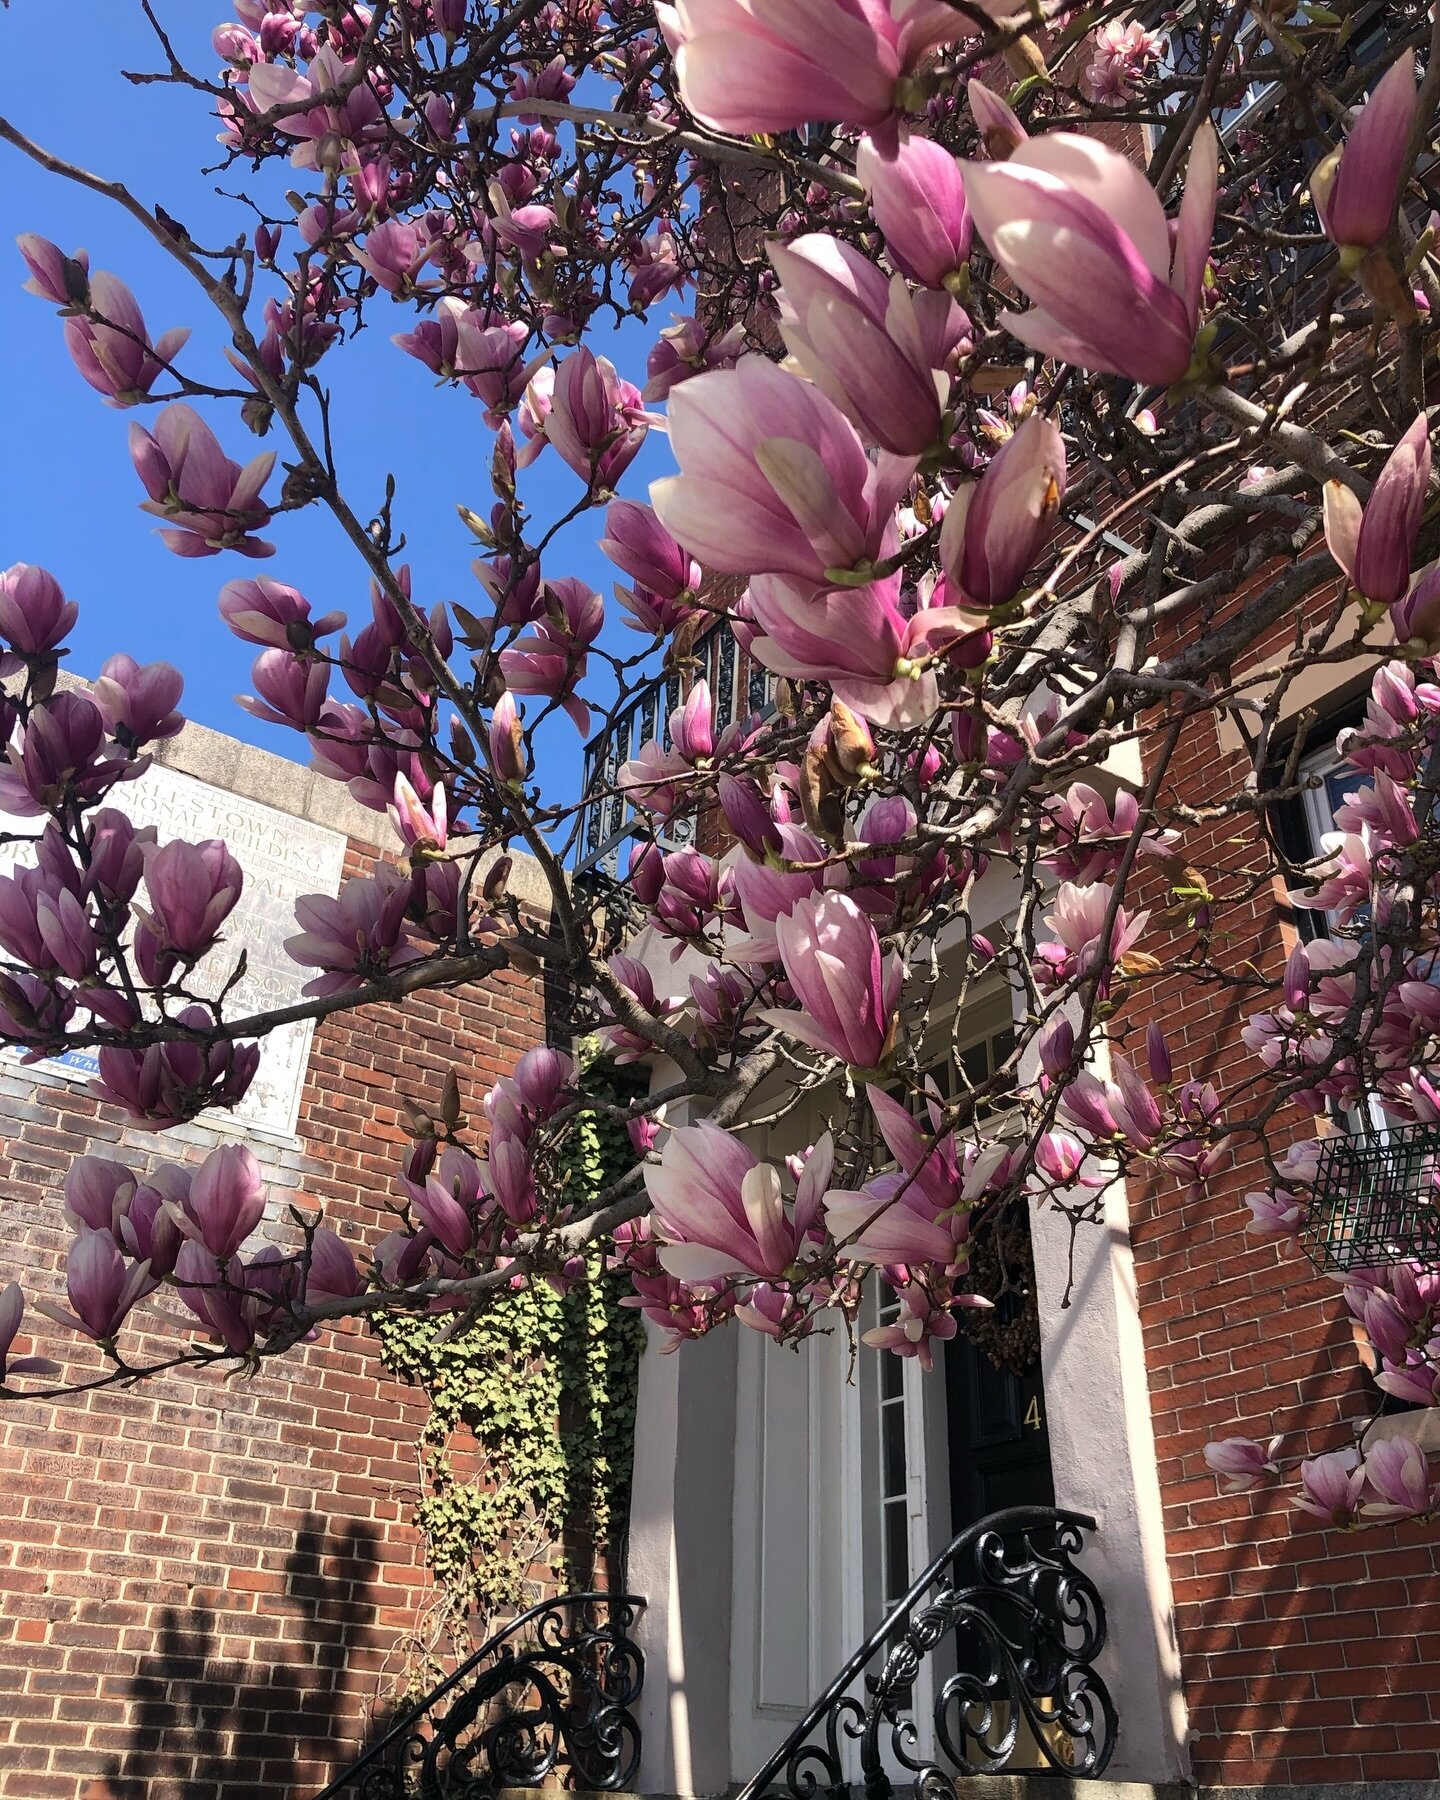 🌸 HAPPY 🌷SPRING 🌸
The first few months of the year are always so busy for us that we are more reactive than proactive. We look forward to spending more time in the next few months developing stronger relationships with ALL clients and partners!